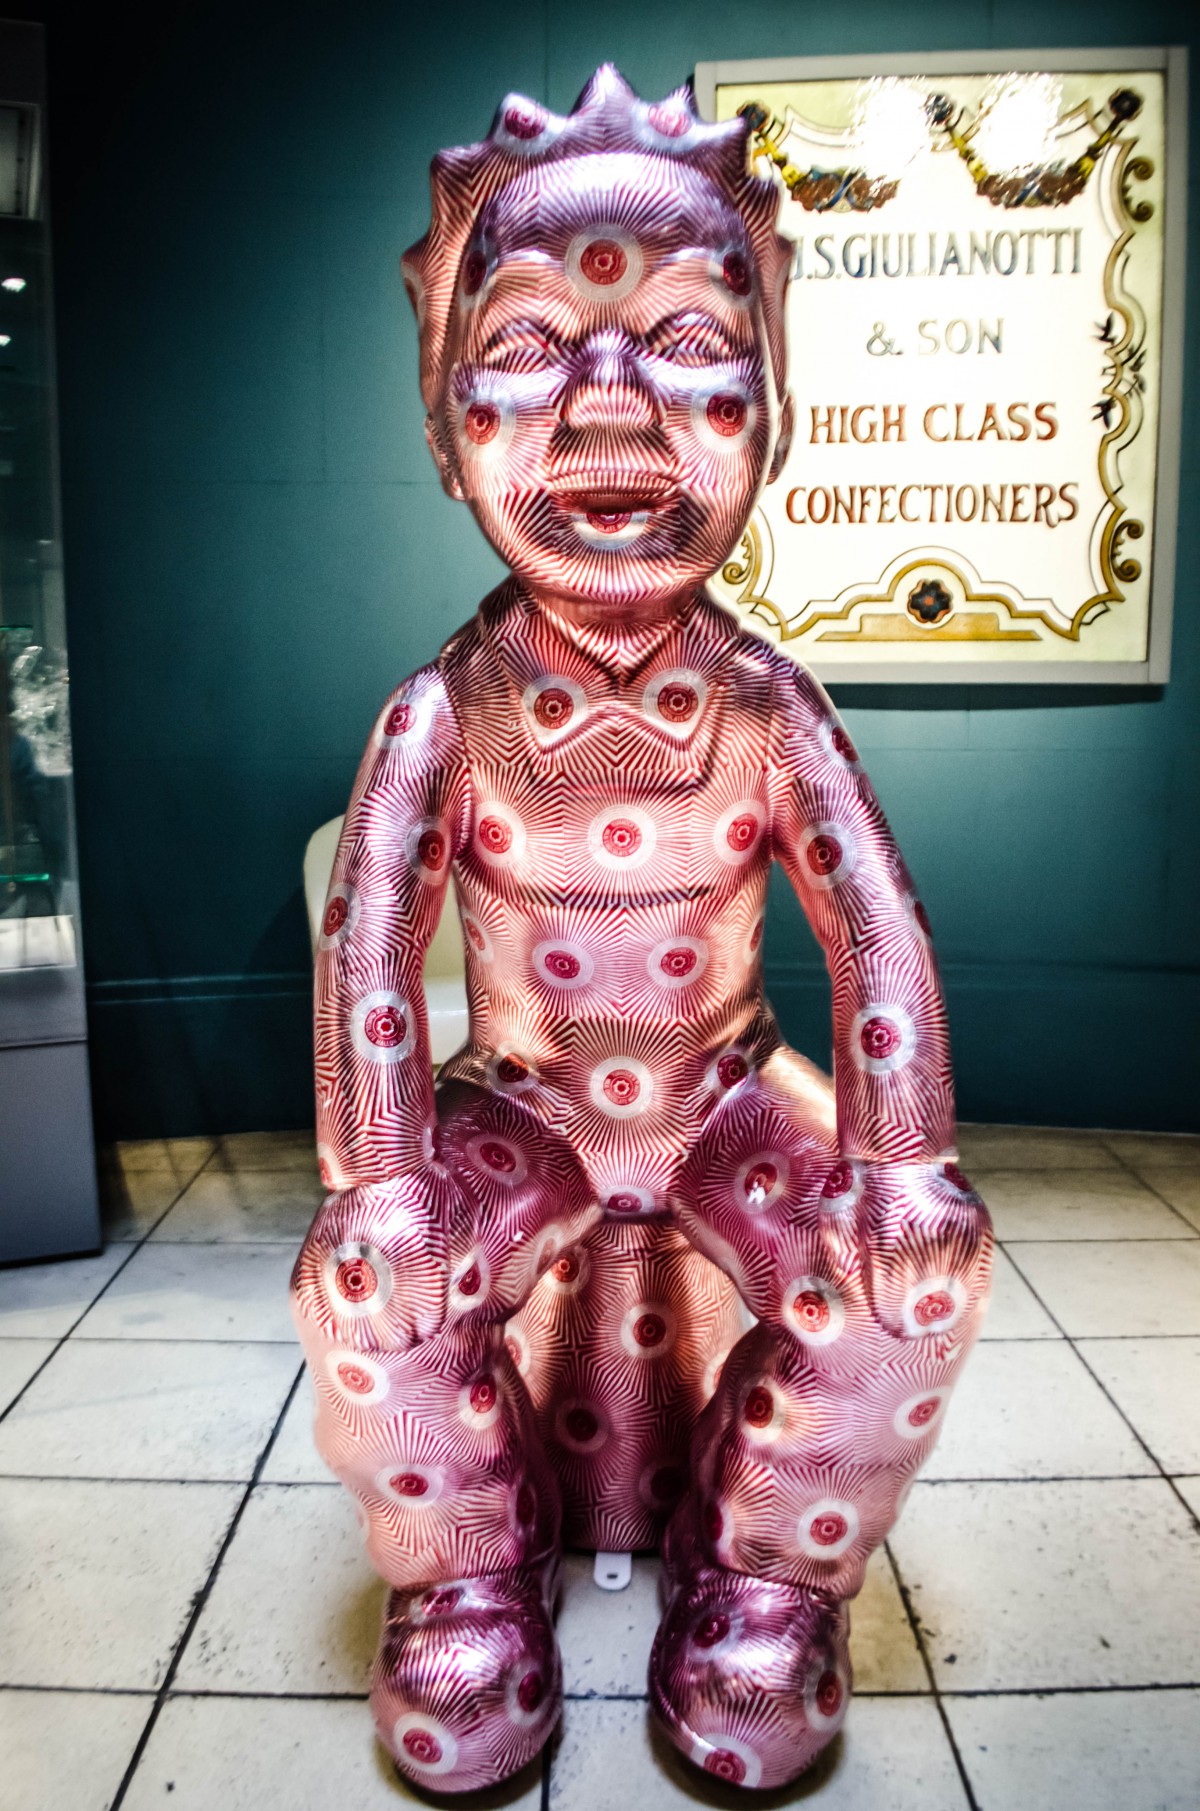 This Tunnocks Oor Wullie is visually stunning and exudes Scottish culture. We  do all love a tea cake!